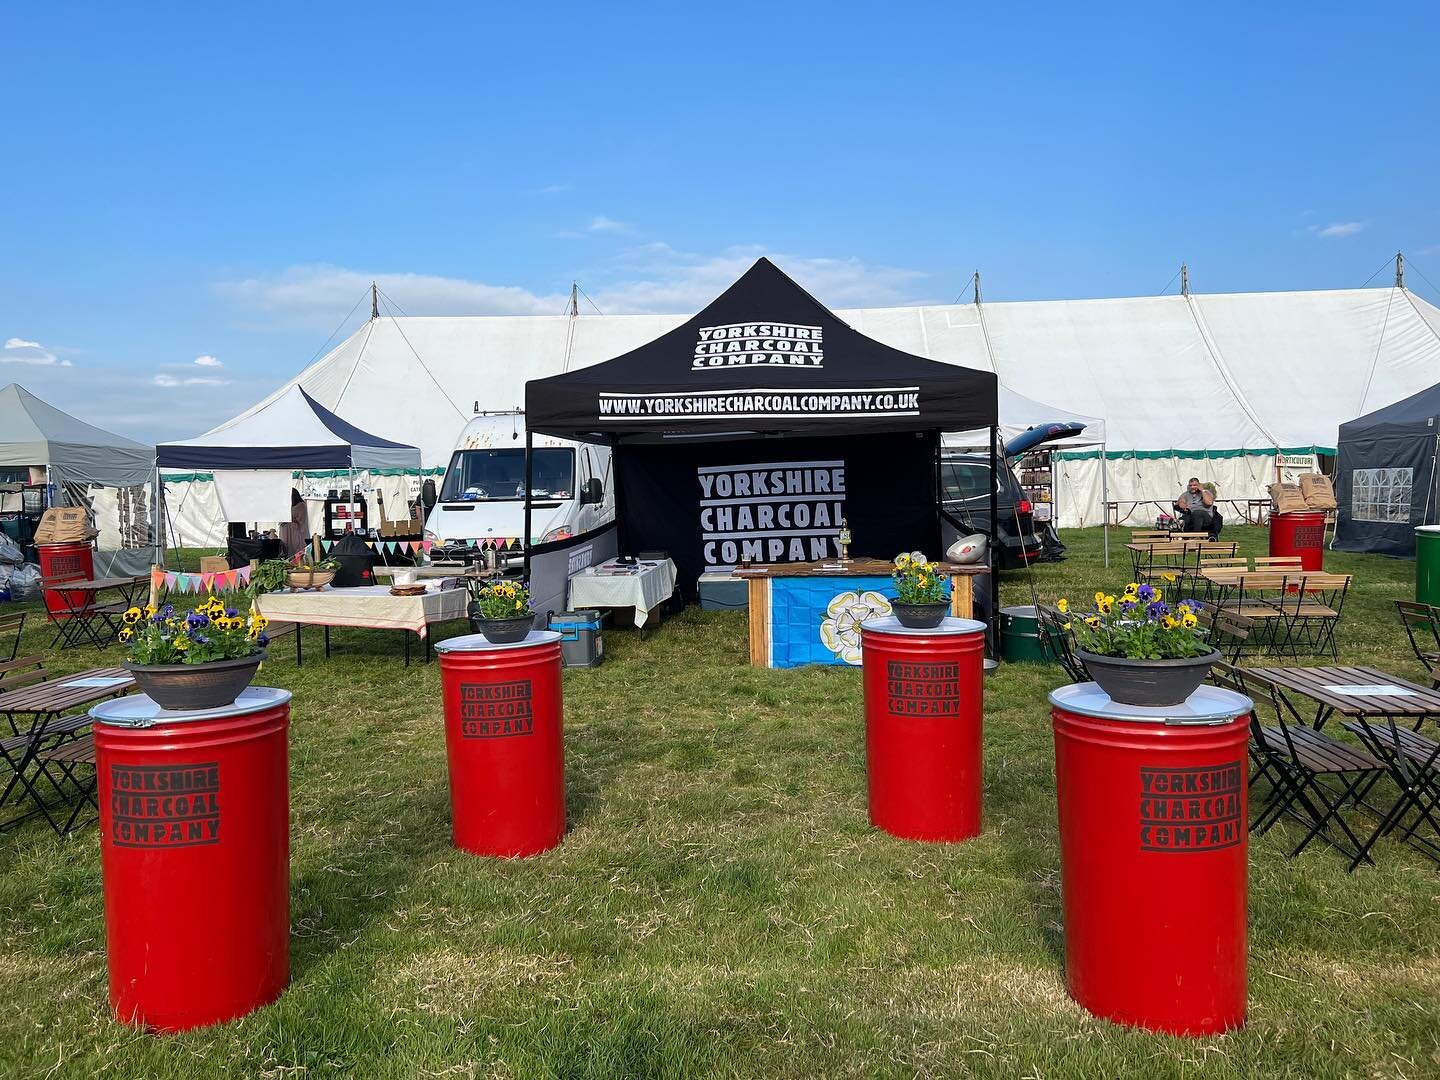 The @wensleydaleshow is on today . Come and visit us our stand . Buy a bag of charcoal and enjoy a free pint of @theakstonbrewery best bitter on the house . 
Who said Yorkshiremen are tight !! 

#wensleydaleshow2022 #theakstonsbrewery #agriculturalsh